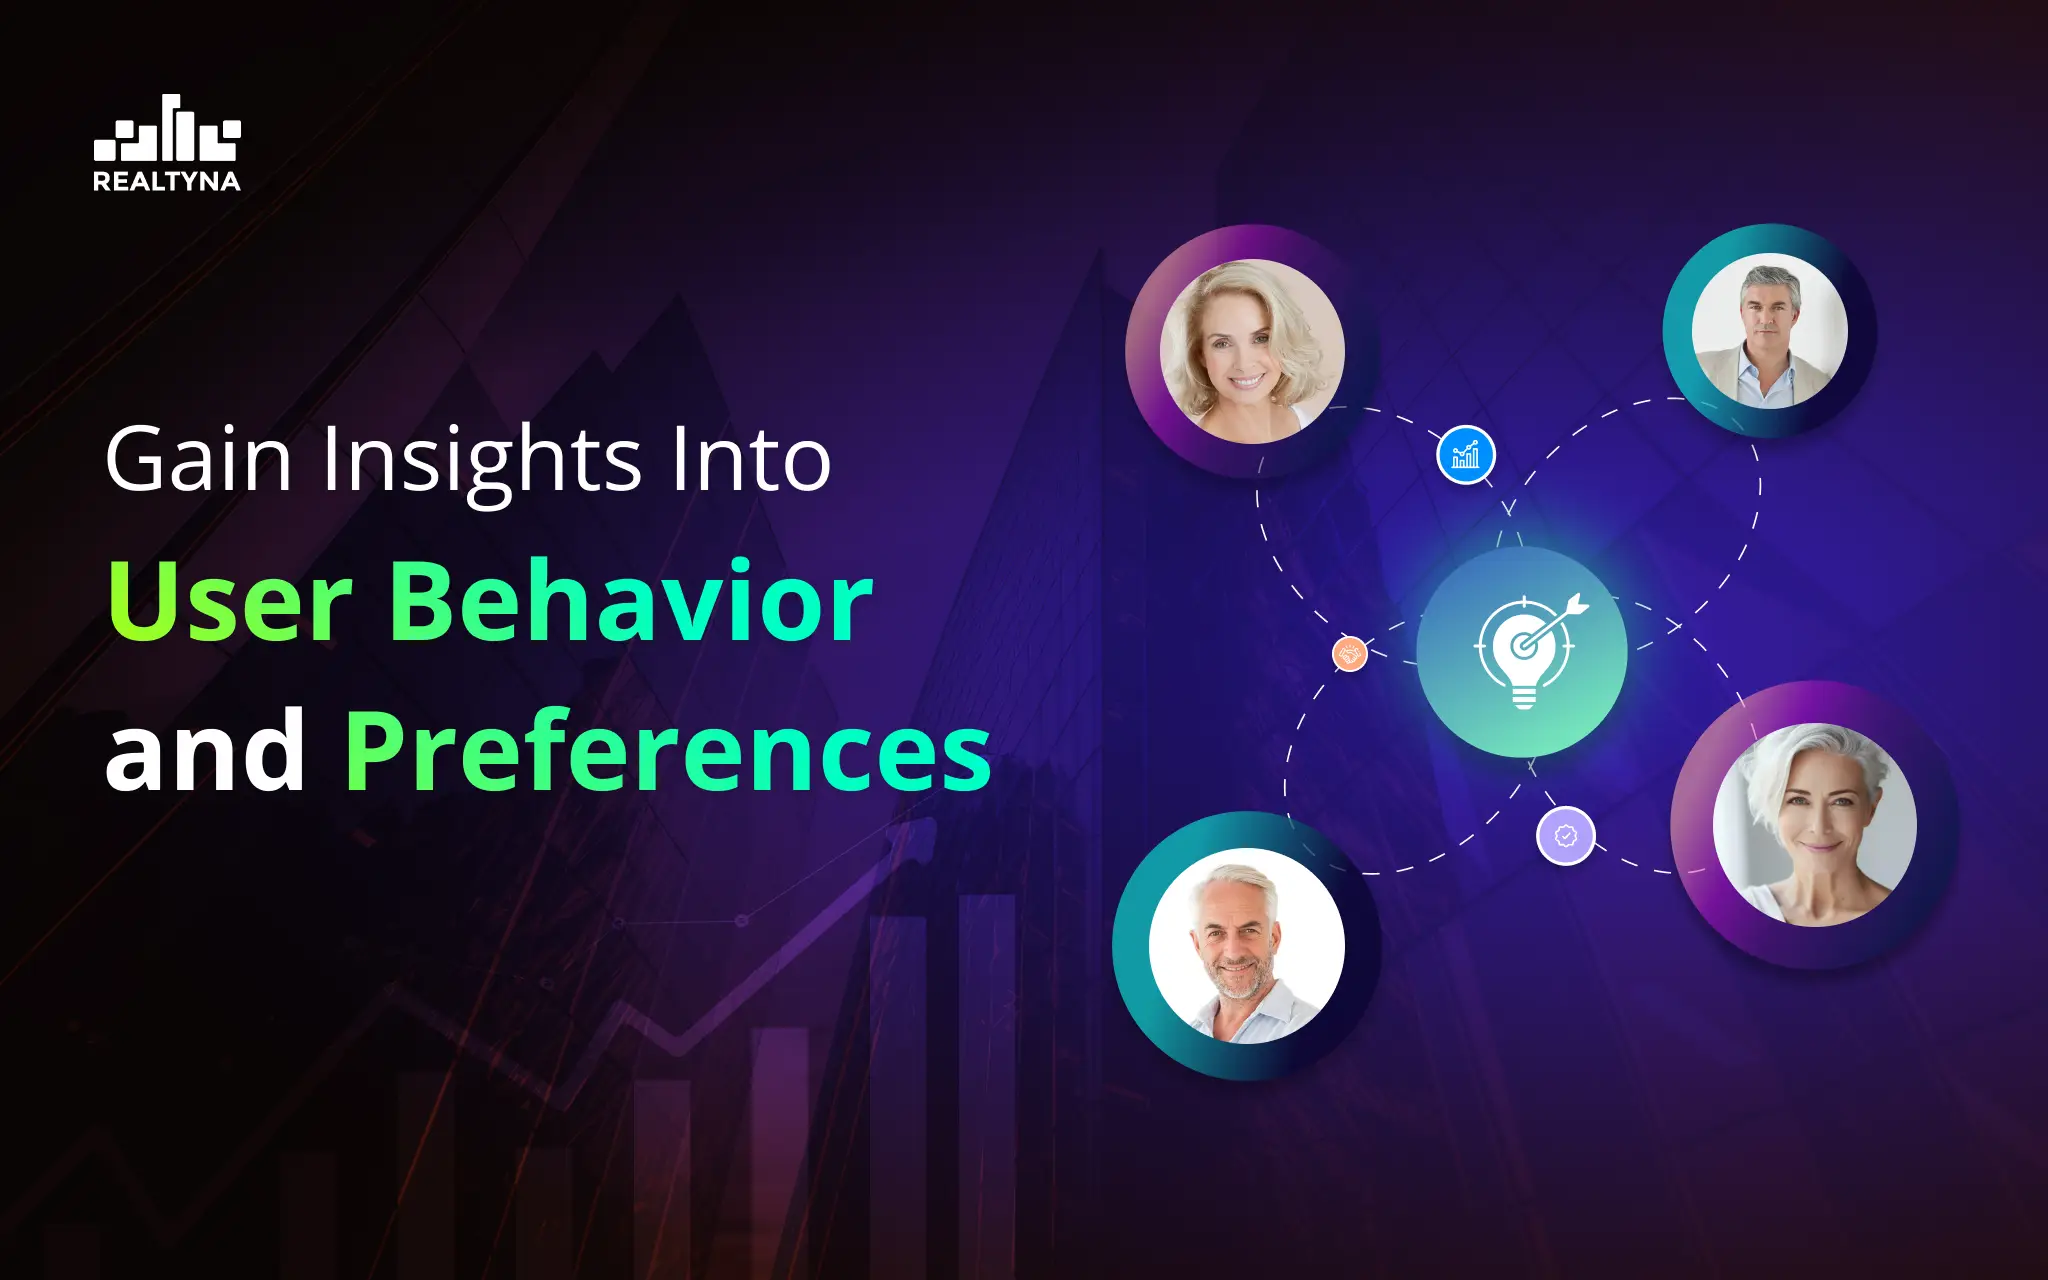 Gain Insights Into User Behavior and Preferences